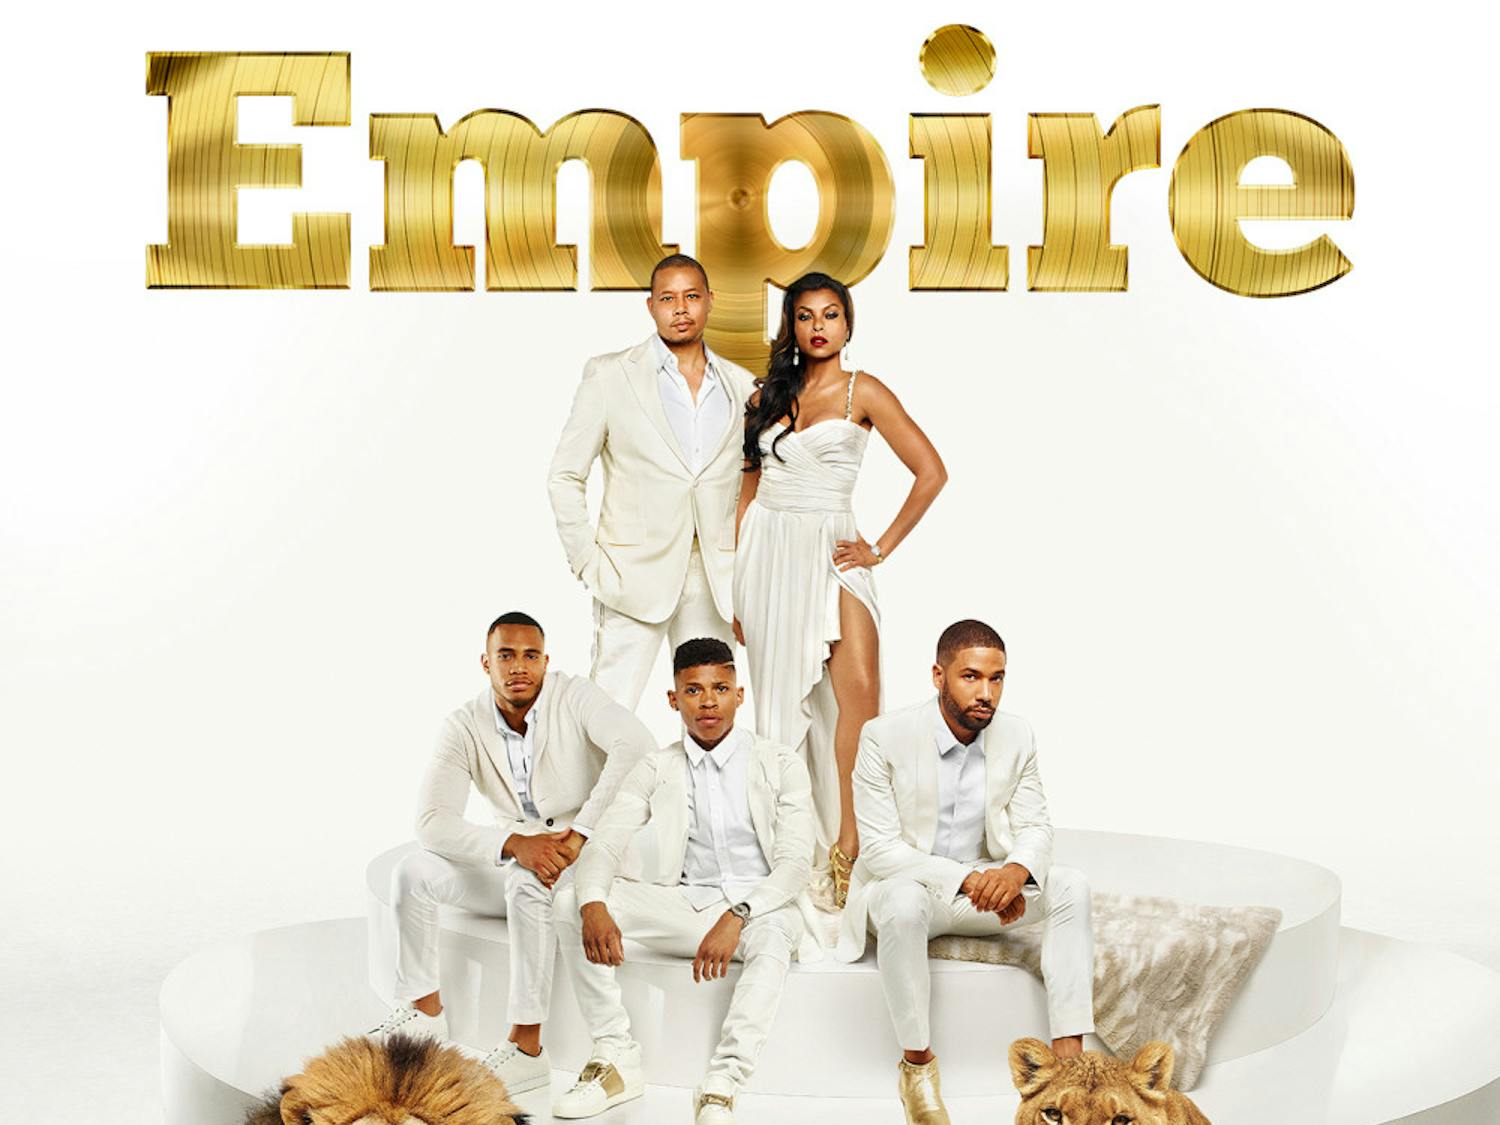 Pictured above is the official season two artwork of Fox’s "Empire." A special preview of the new season will be held at the Reitz Union on Friday. Season two will air Wednesday on Fox.